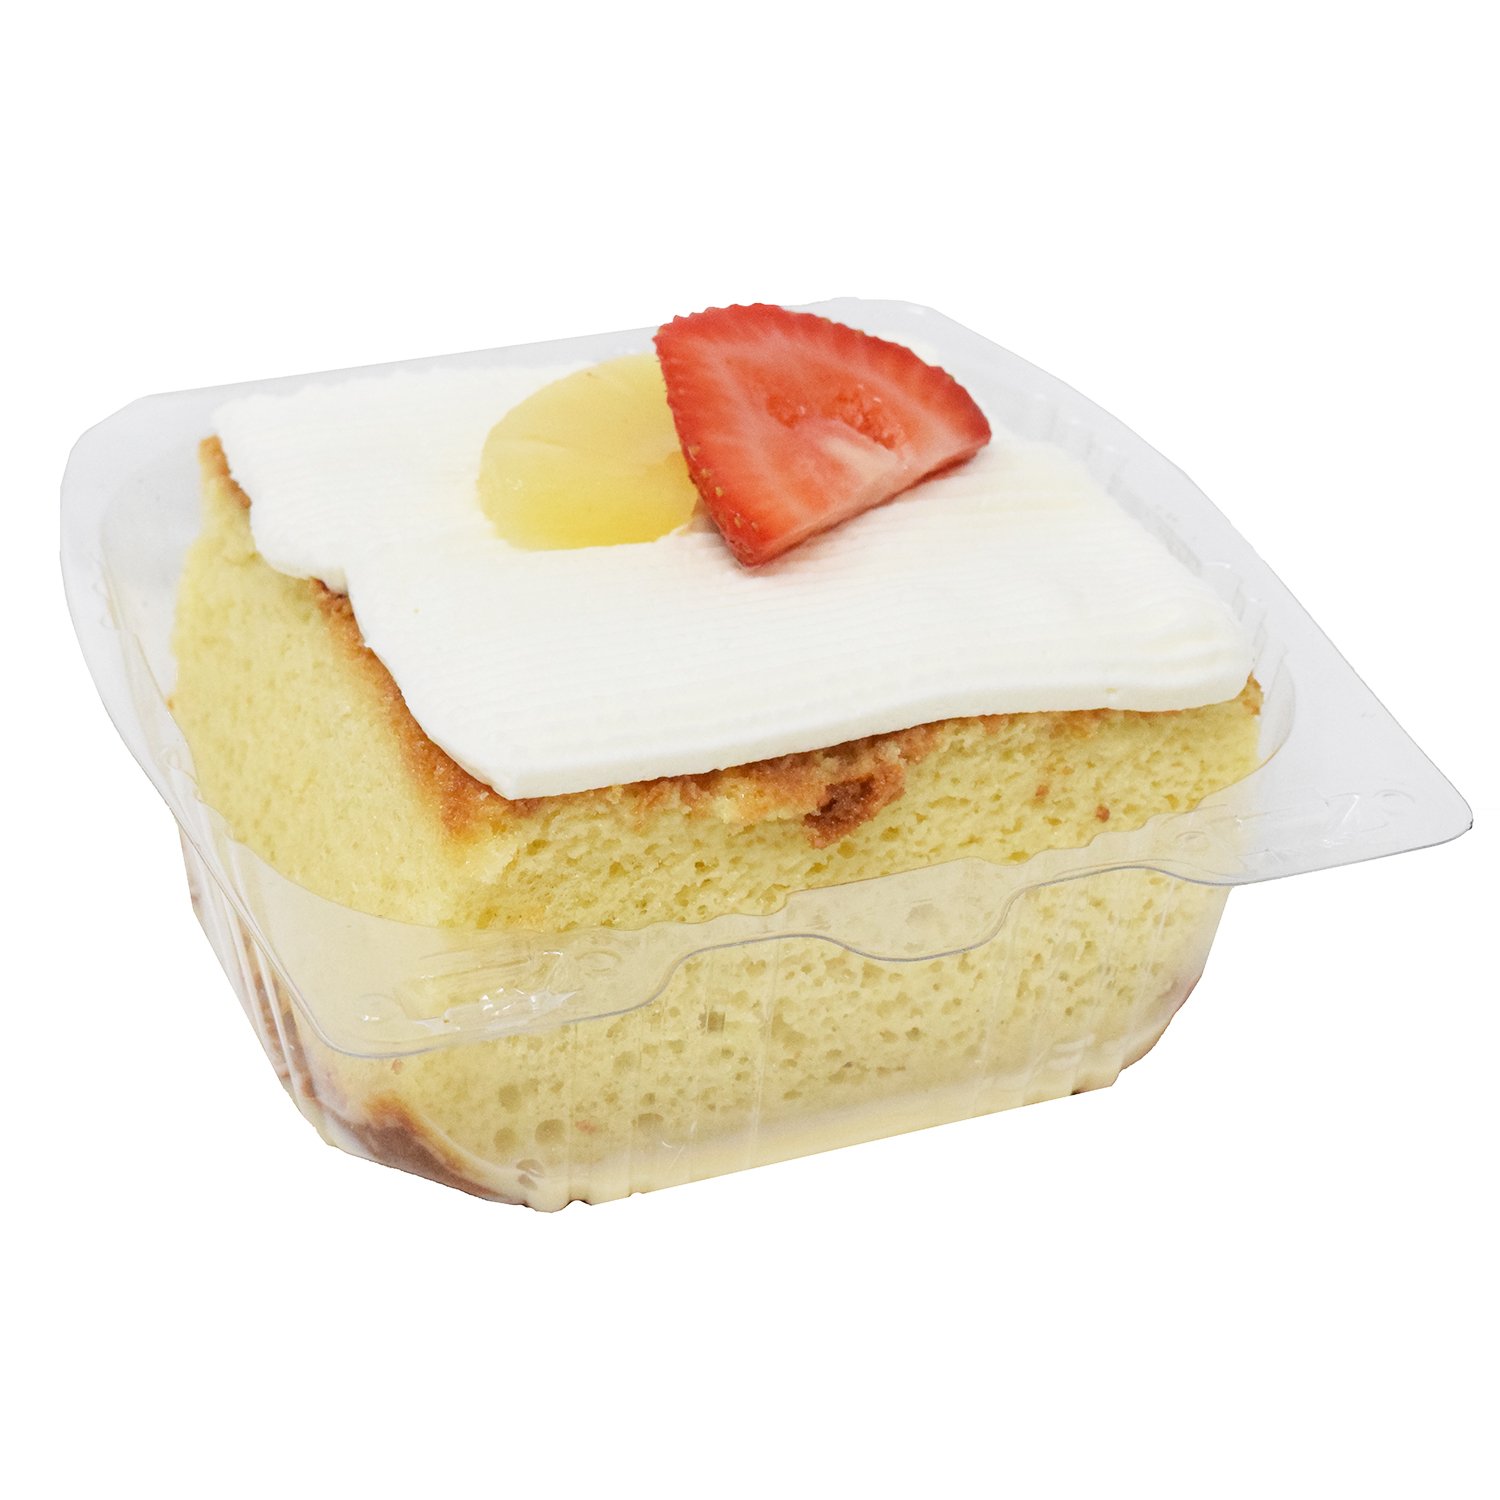 H E B Tres Leches Cake With Two Fruits Shop Cakes At H E B